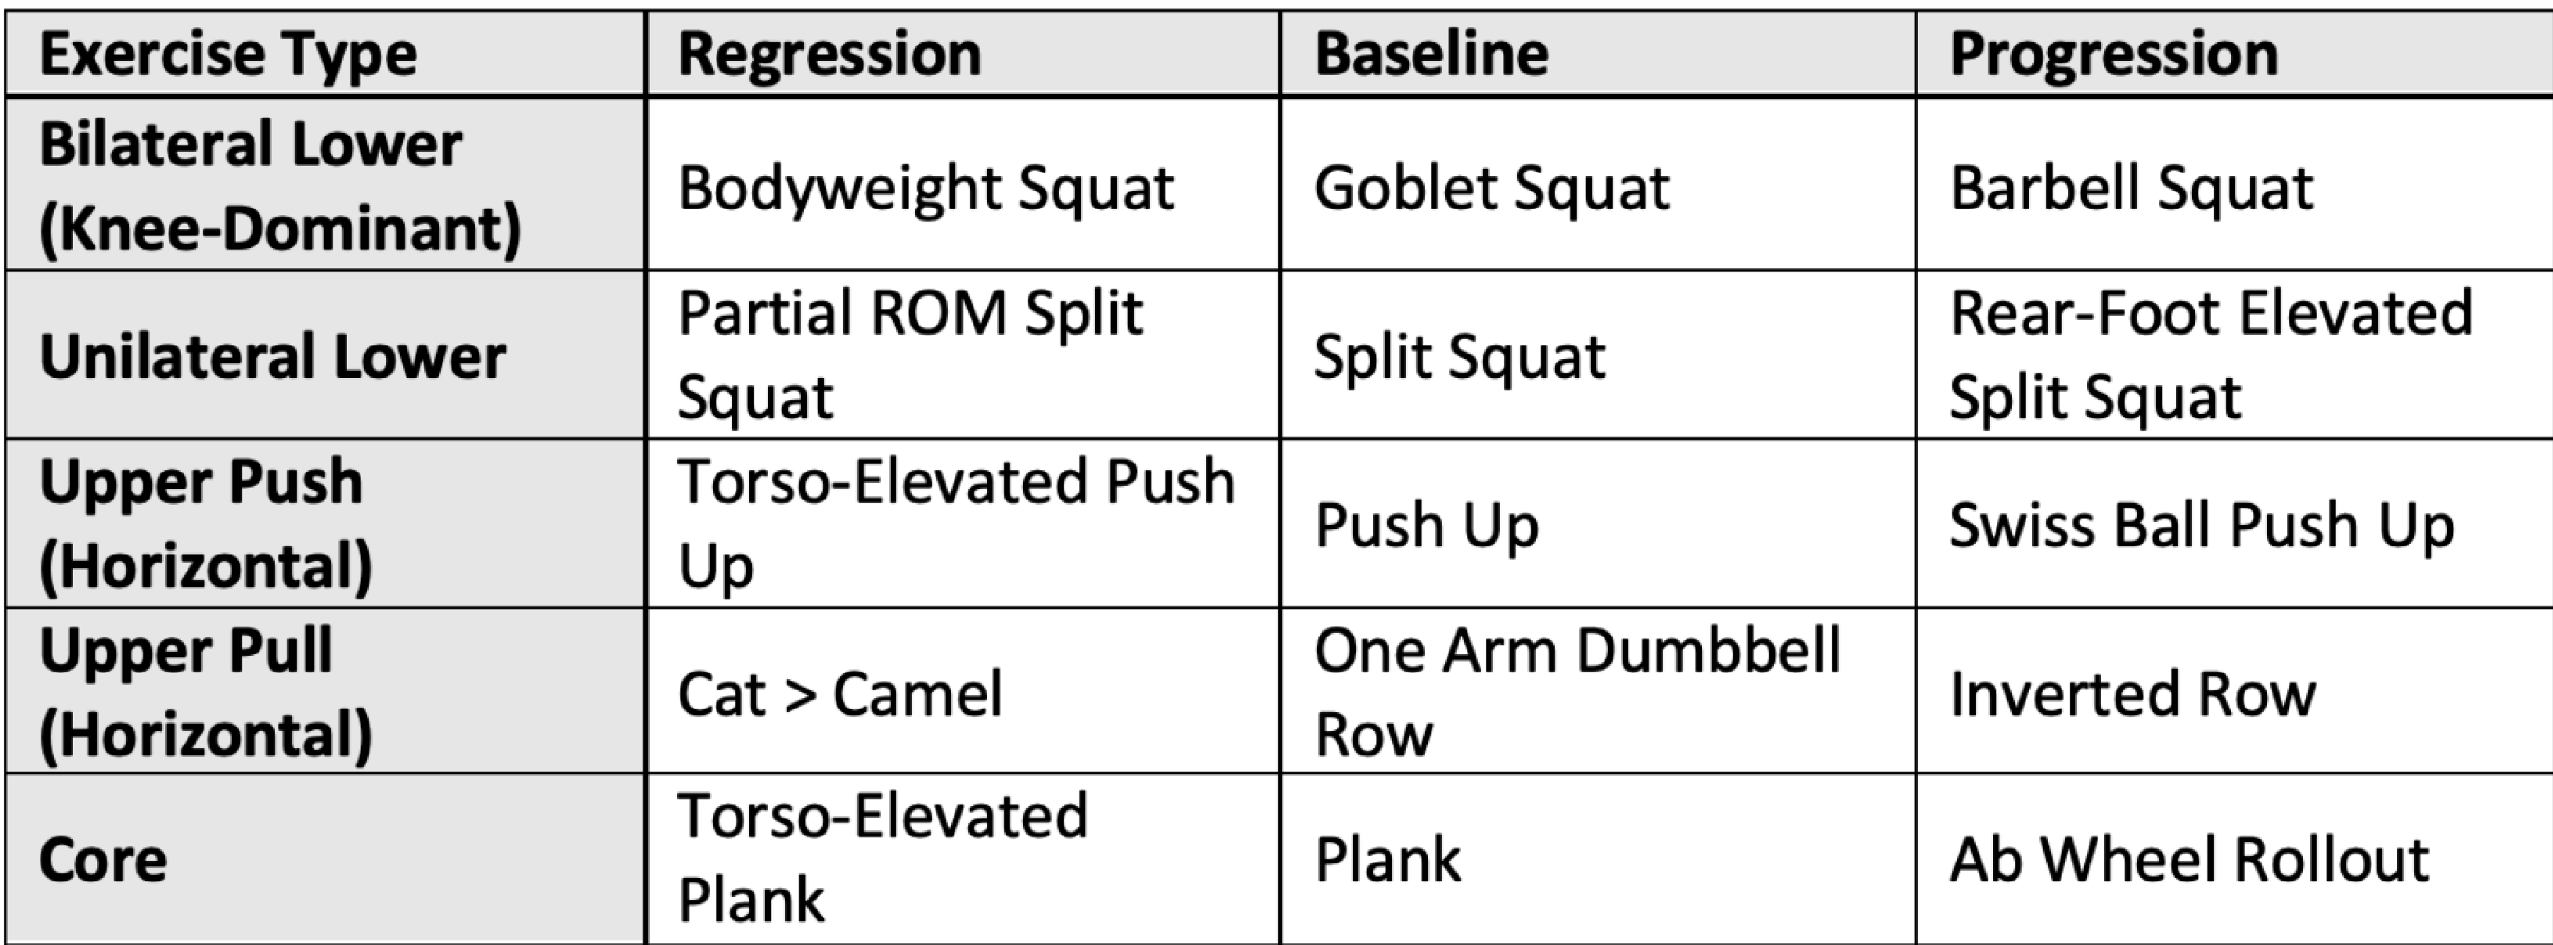 <p>understand the regression and progression chart about different resistance training exercises and WHY these exercises are in this progression</p>